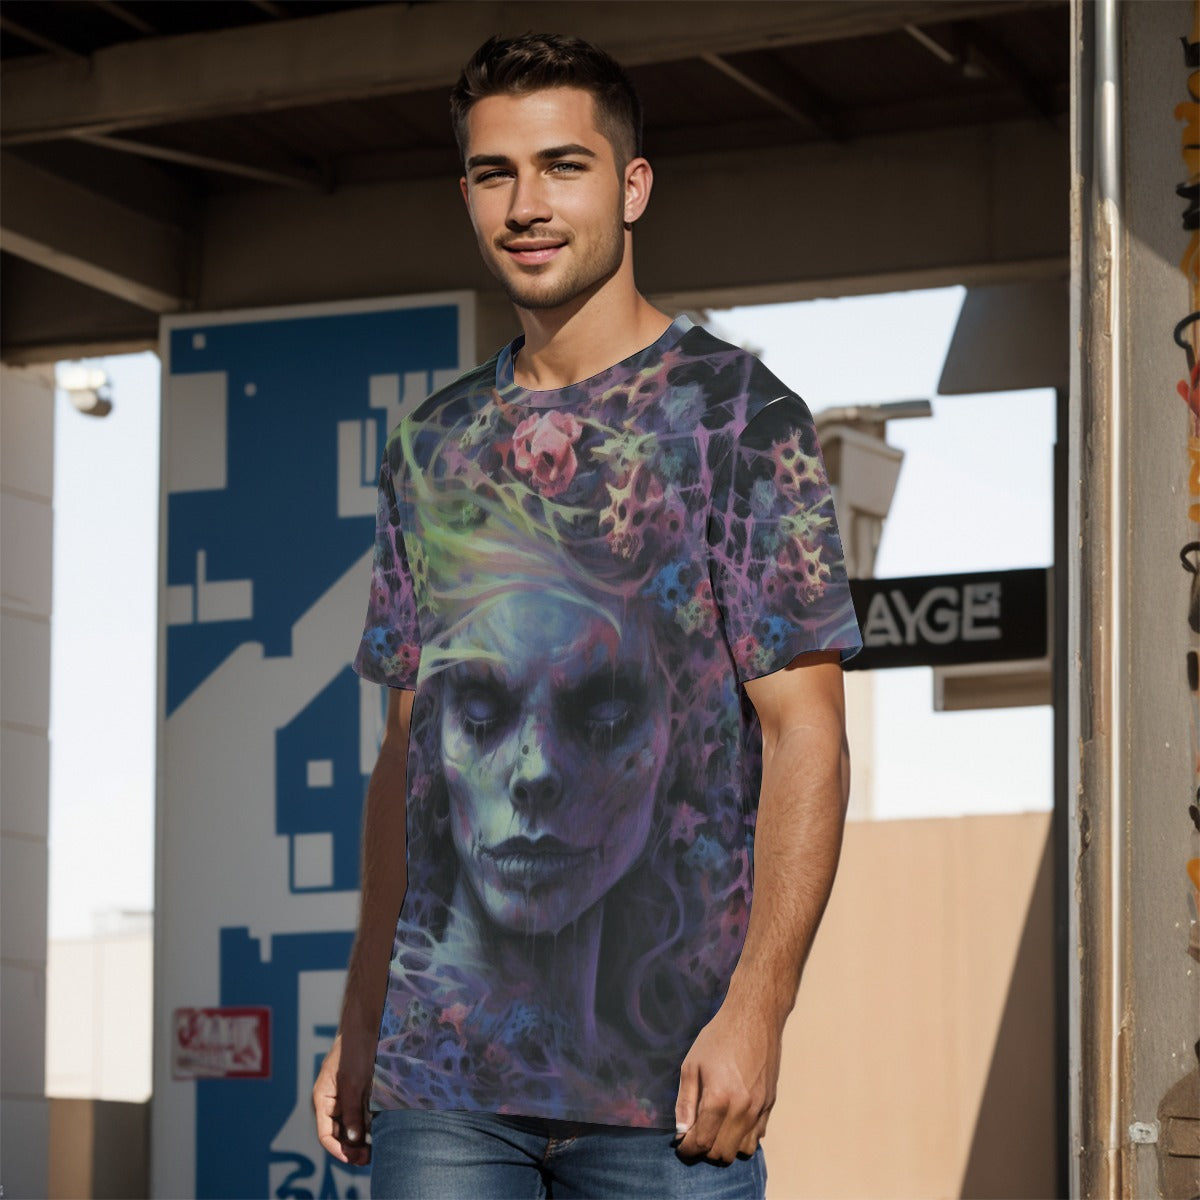 Stand out  with the  Men's T-Shirt  available at Hey Nugget. Grab yours today!